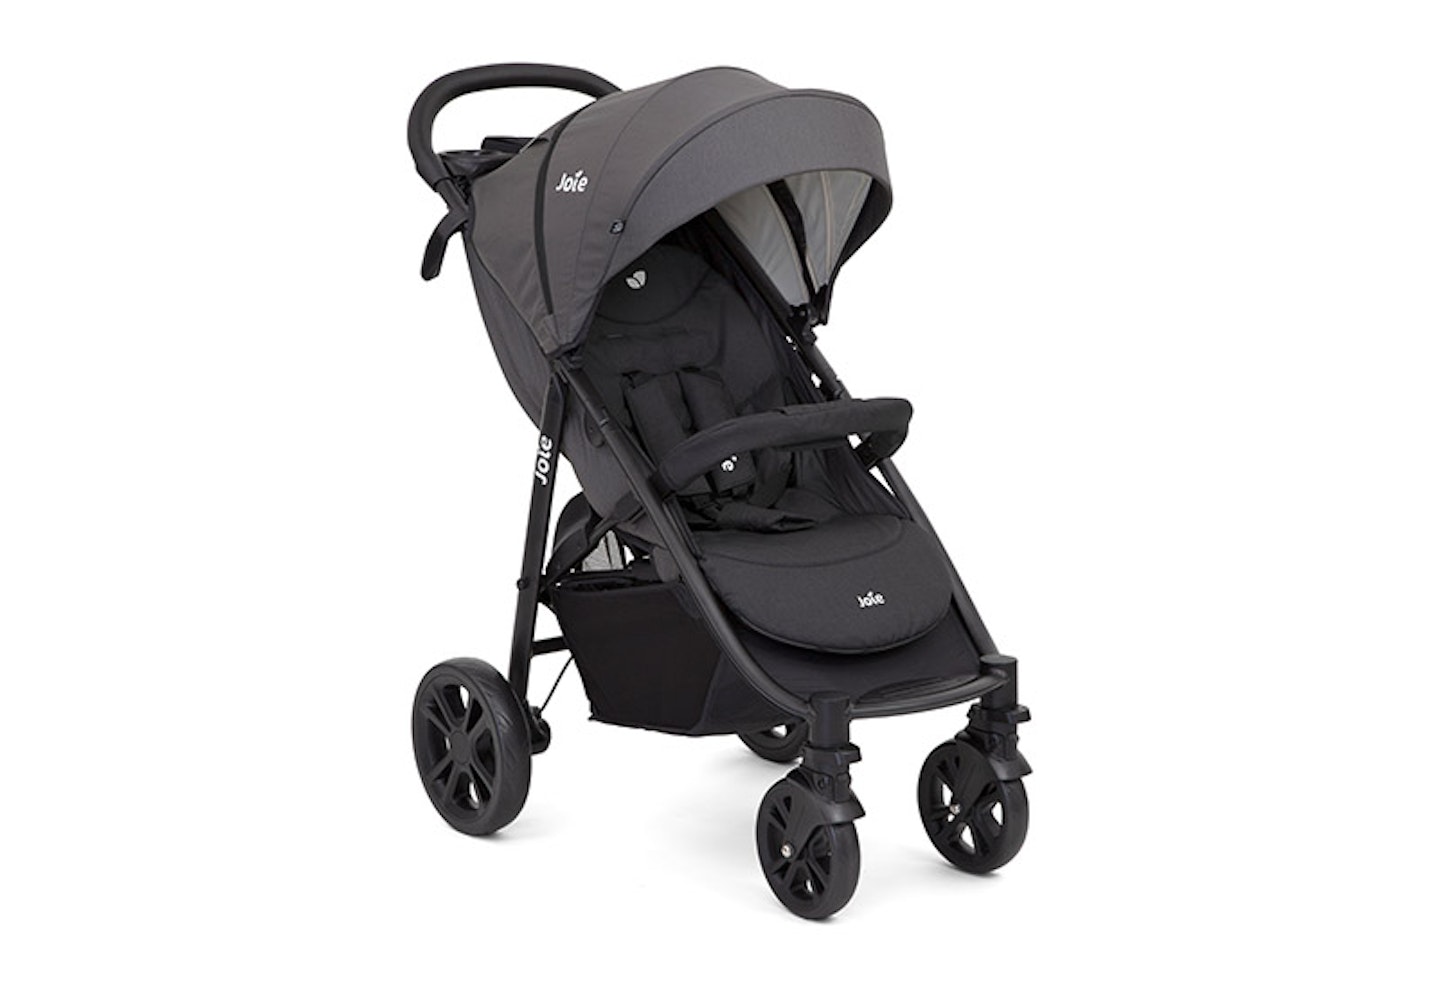 Joie's 2021 award-winning car seats and travel system: Everything you need to know